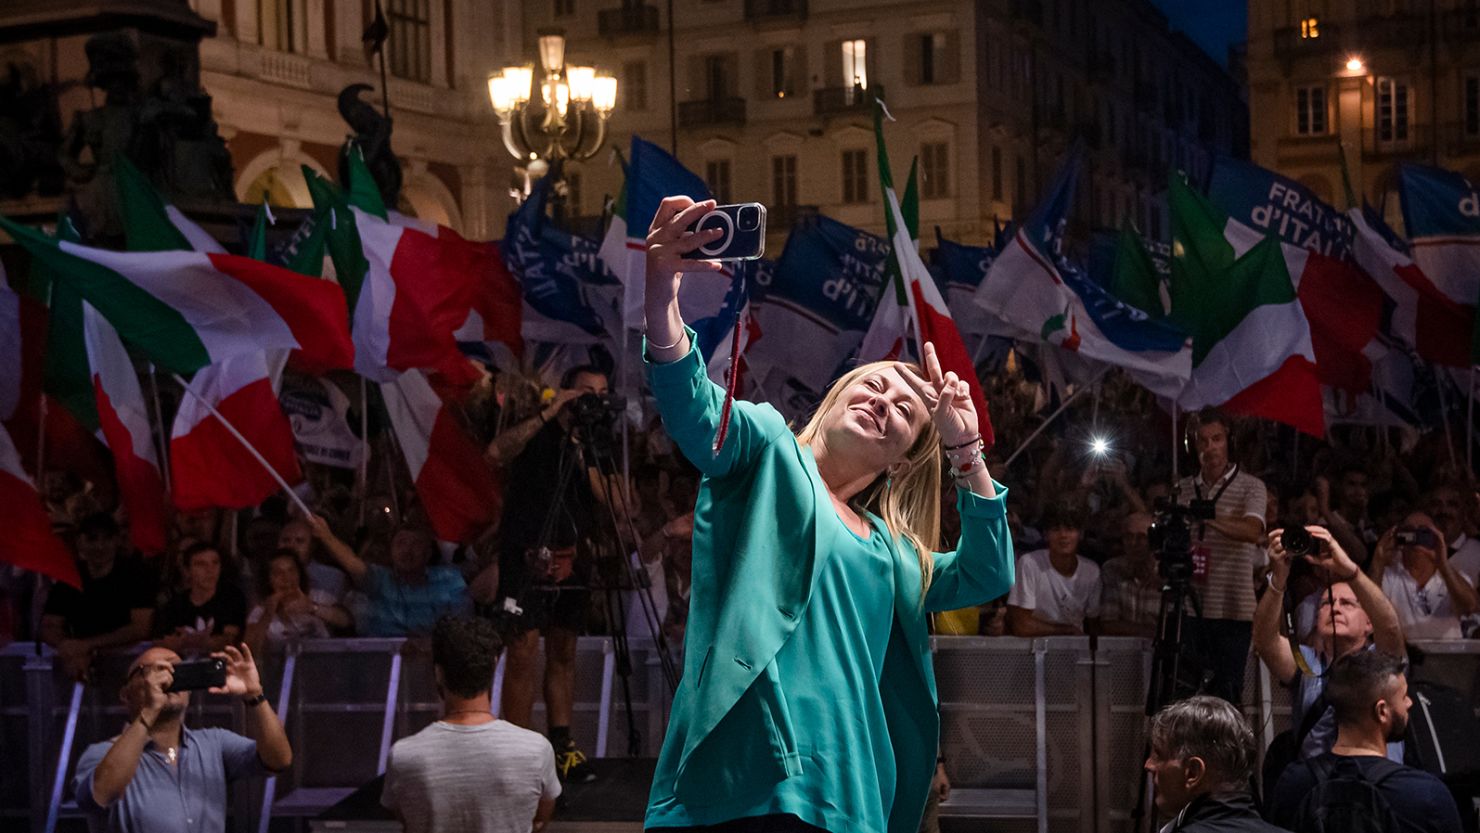 Giorgia Meloni, leader of the far-right party Brothers of Italy, is seen on the campaign trail in September 2022. Other populists are enjoying electoral success in Europe.